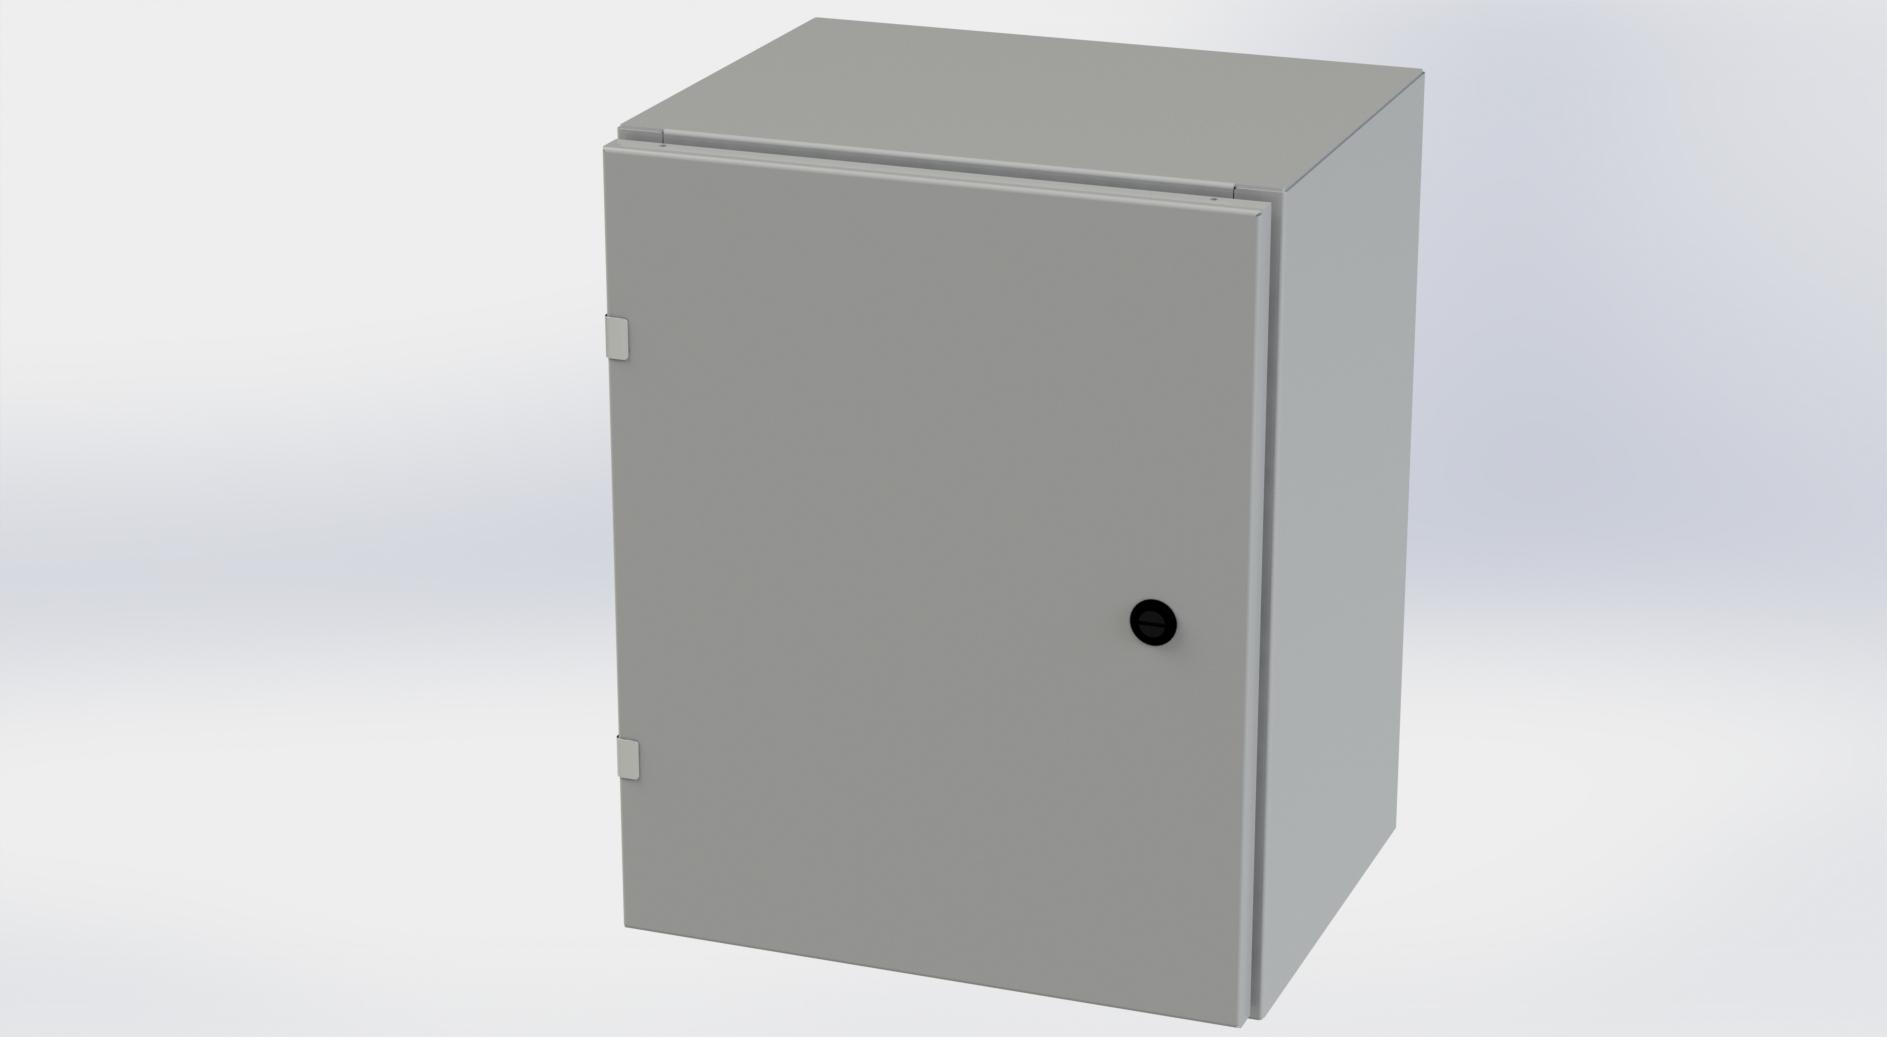 Saginaw Control SCE-20EL1612LP EL Enclosure, Height:20.00", Width:16.00", Depth:12.00", ANSI-61 gray powder coating inside and out. Optional sub-panels are powder coated white.